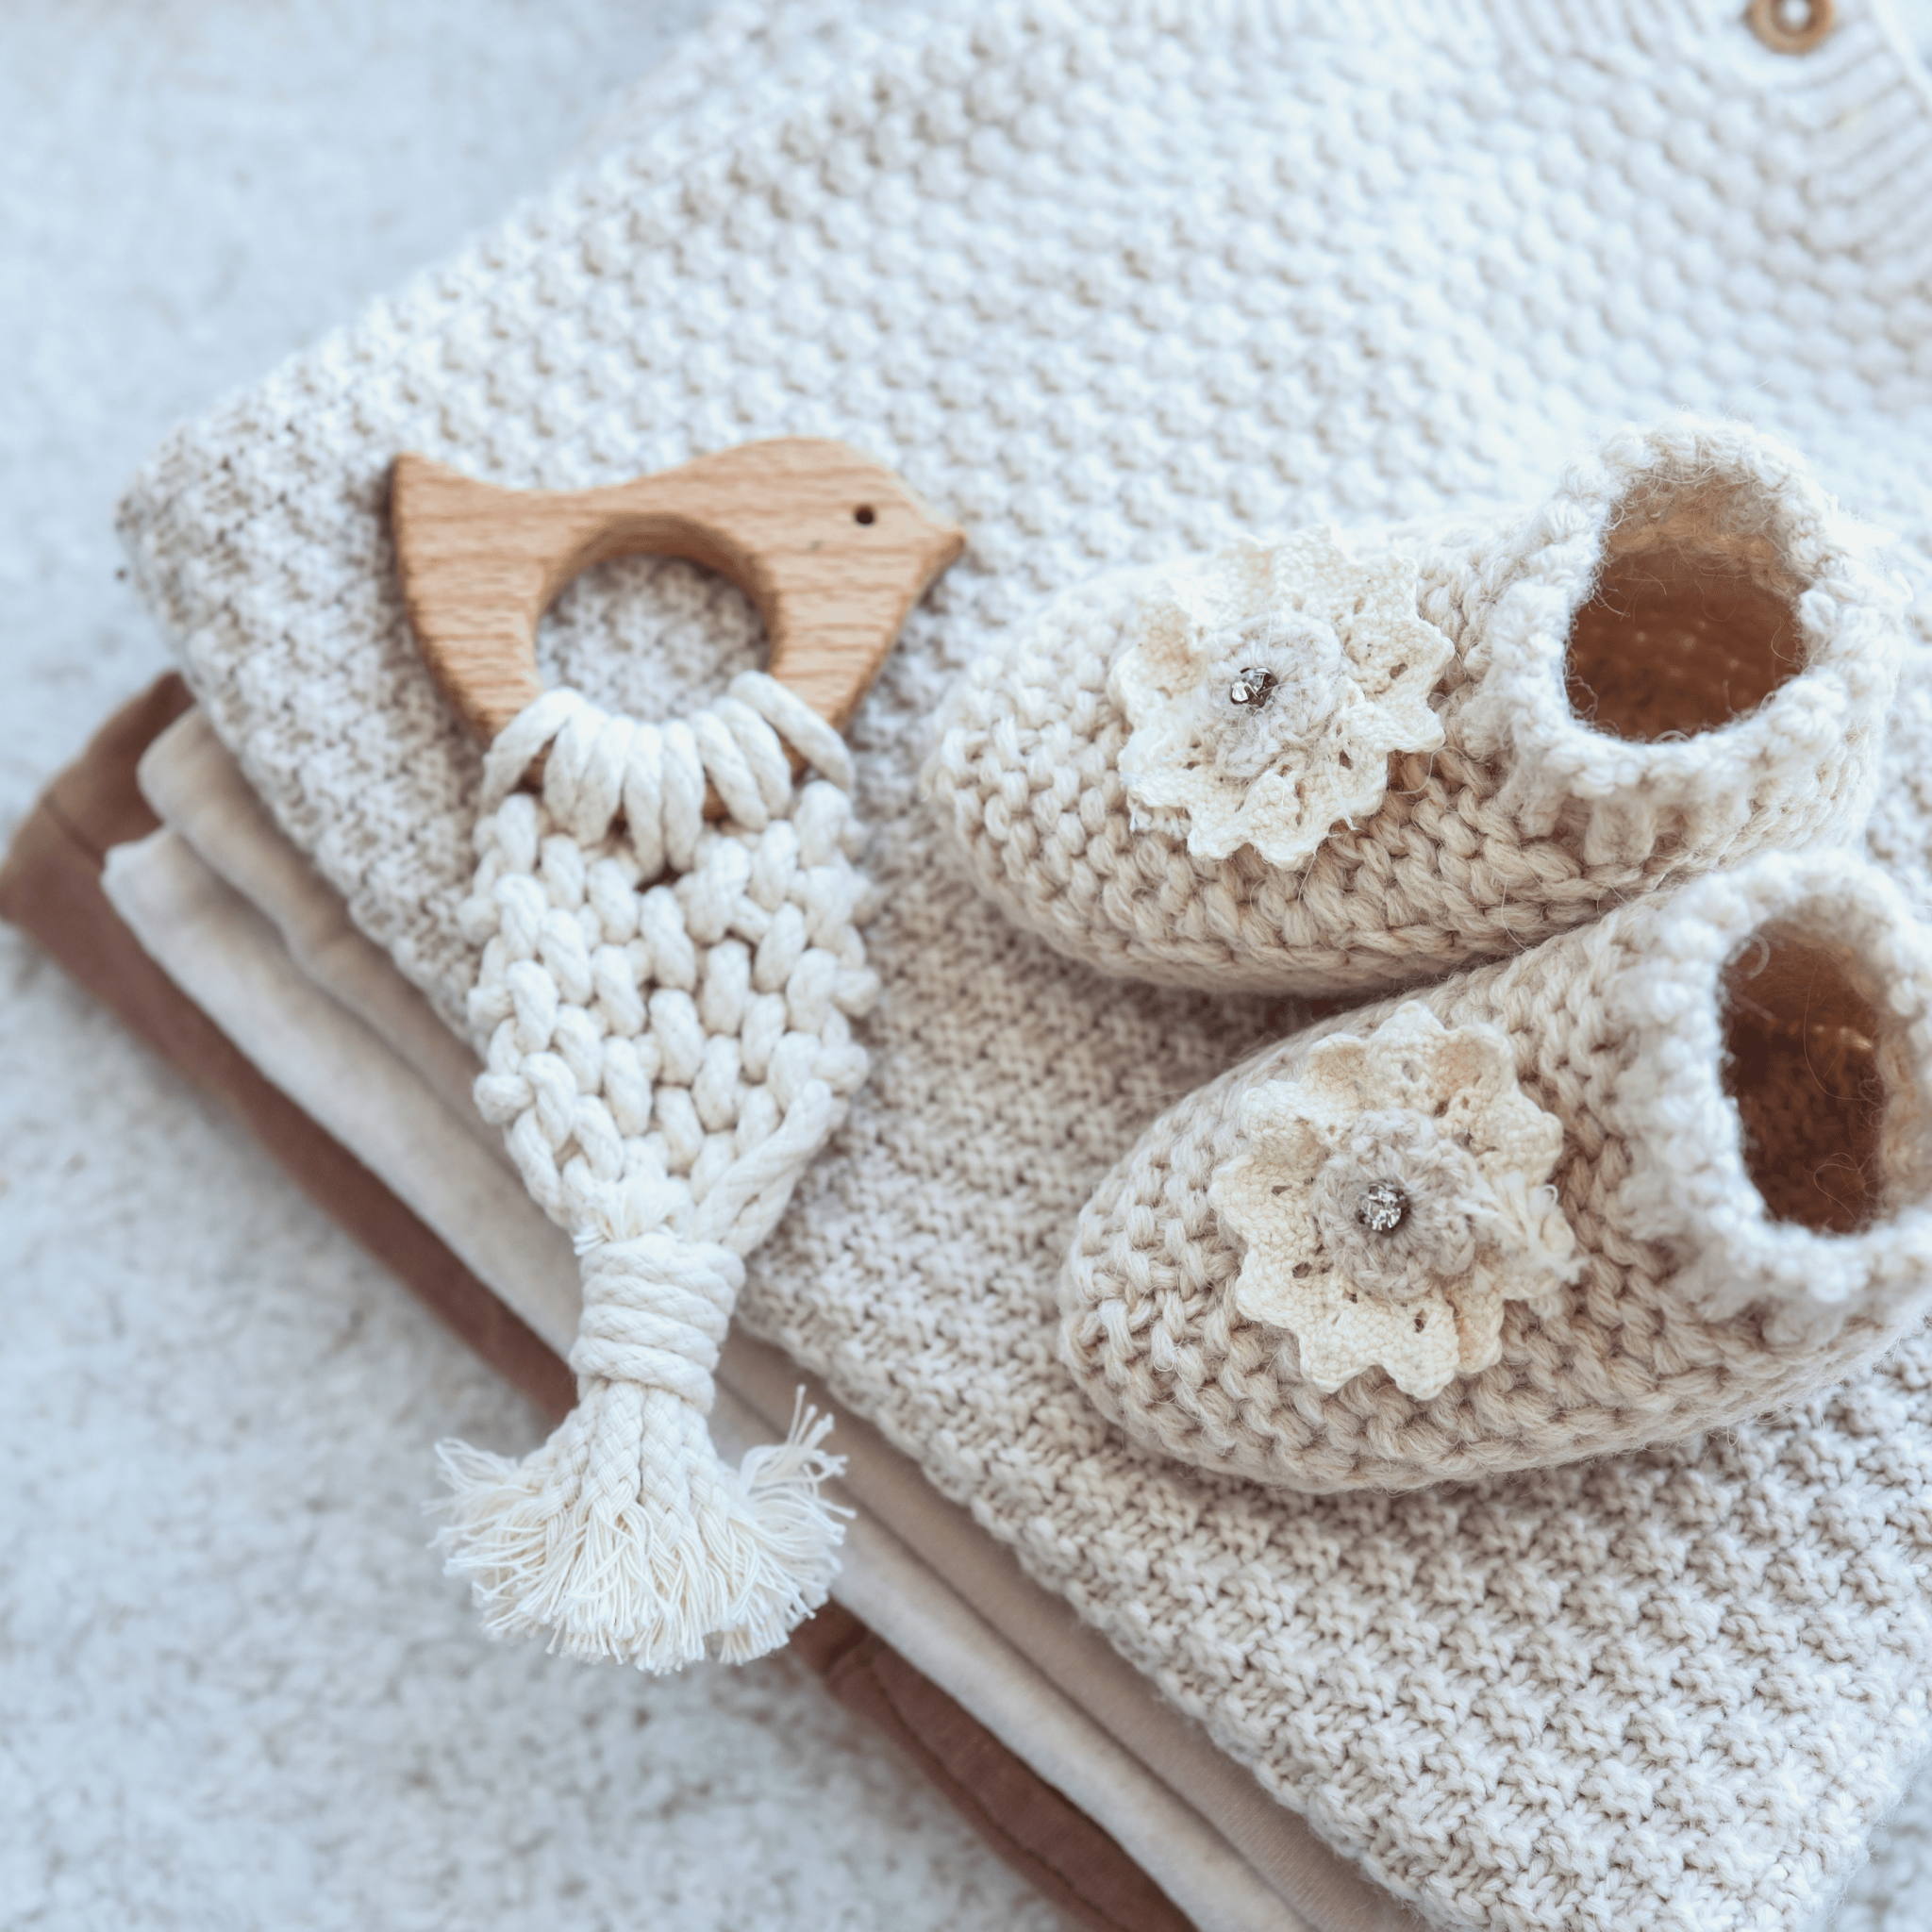 A pair of knitted baby booties with floral accents on a stack of clothes next to a [6-Month-Prepaid] Hooks & Needles Subscription Box #30 wooden bird teether.